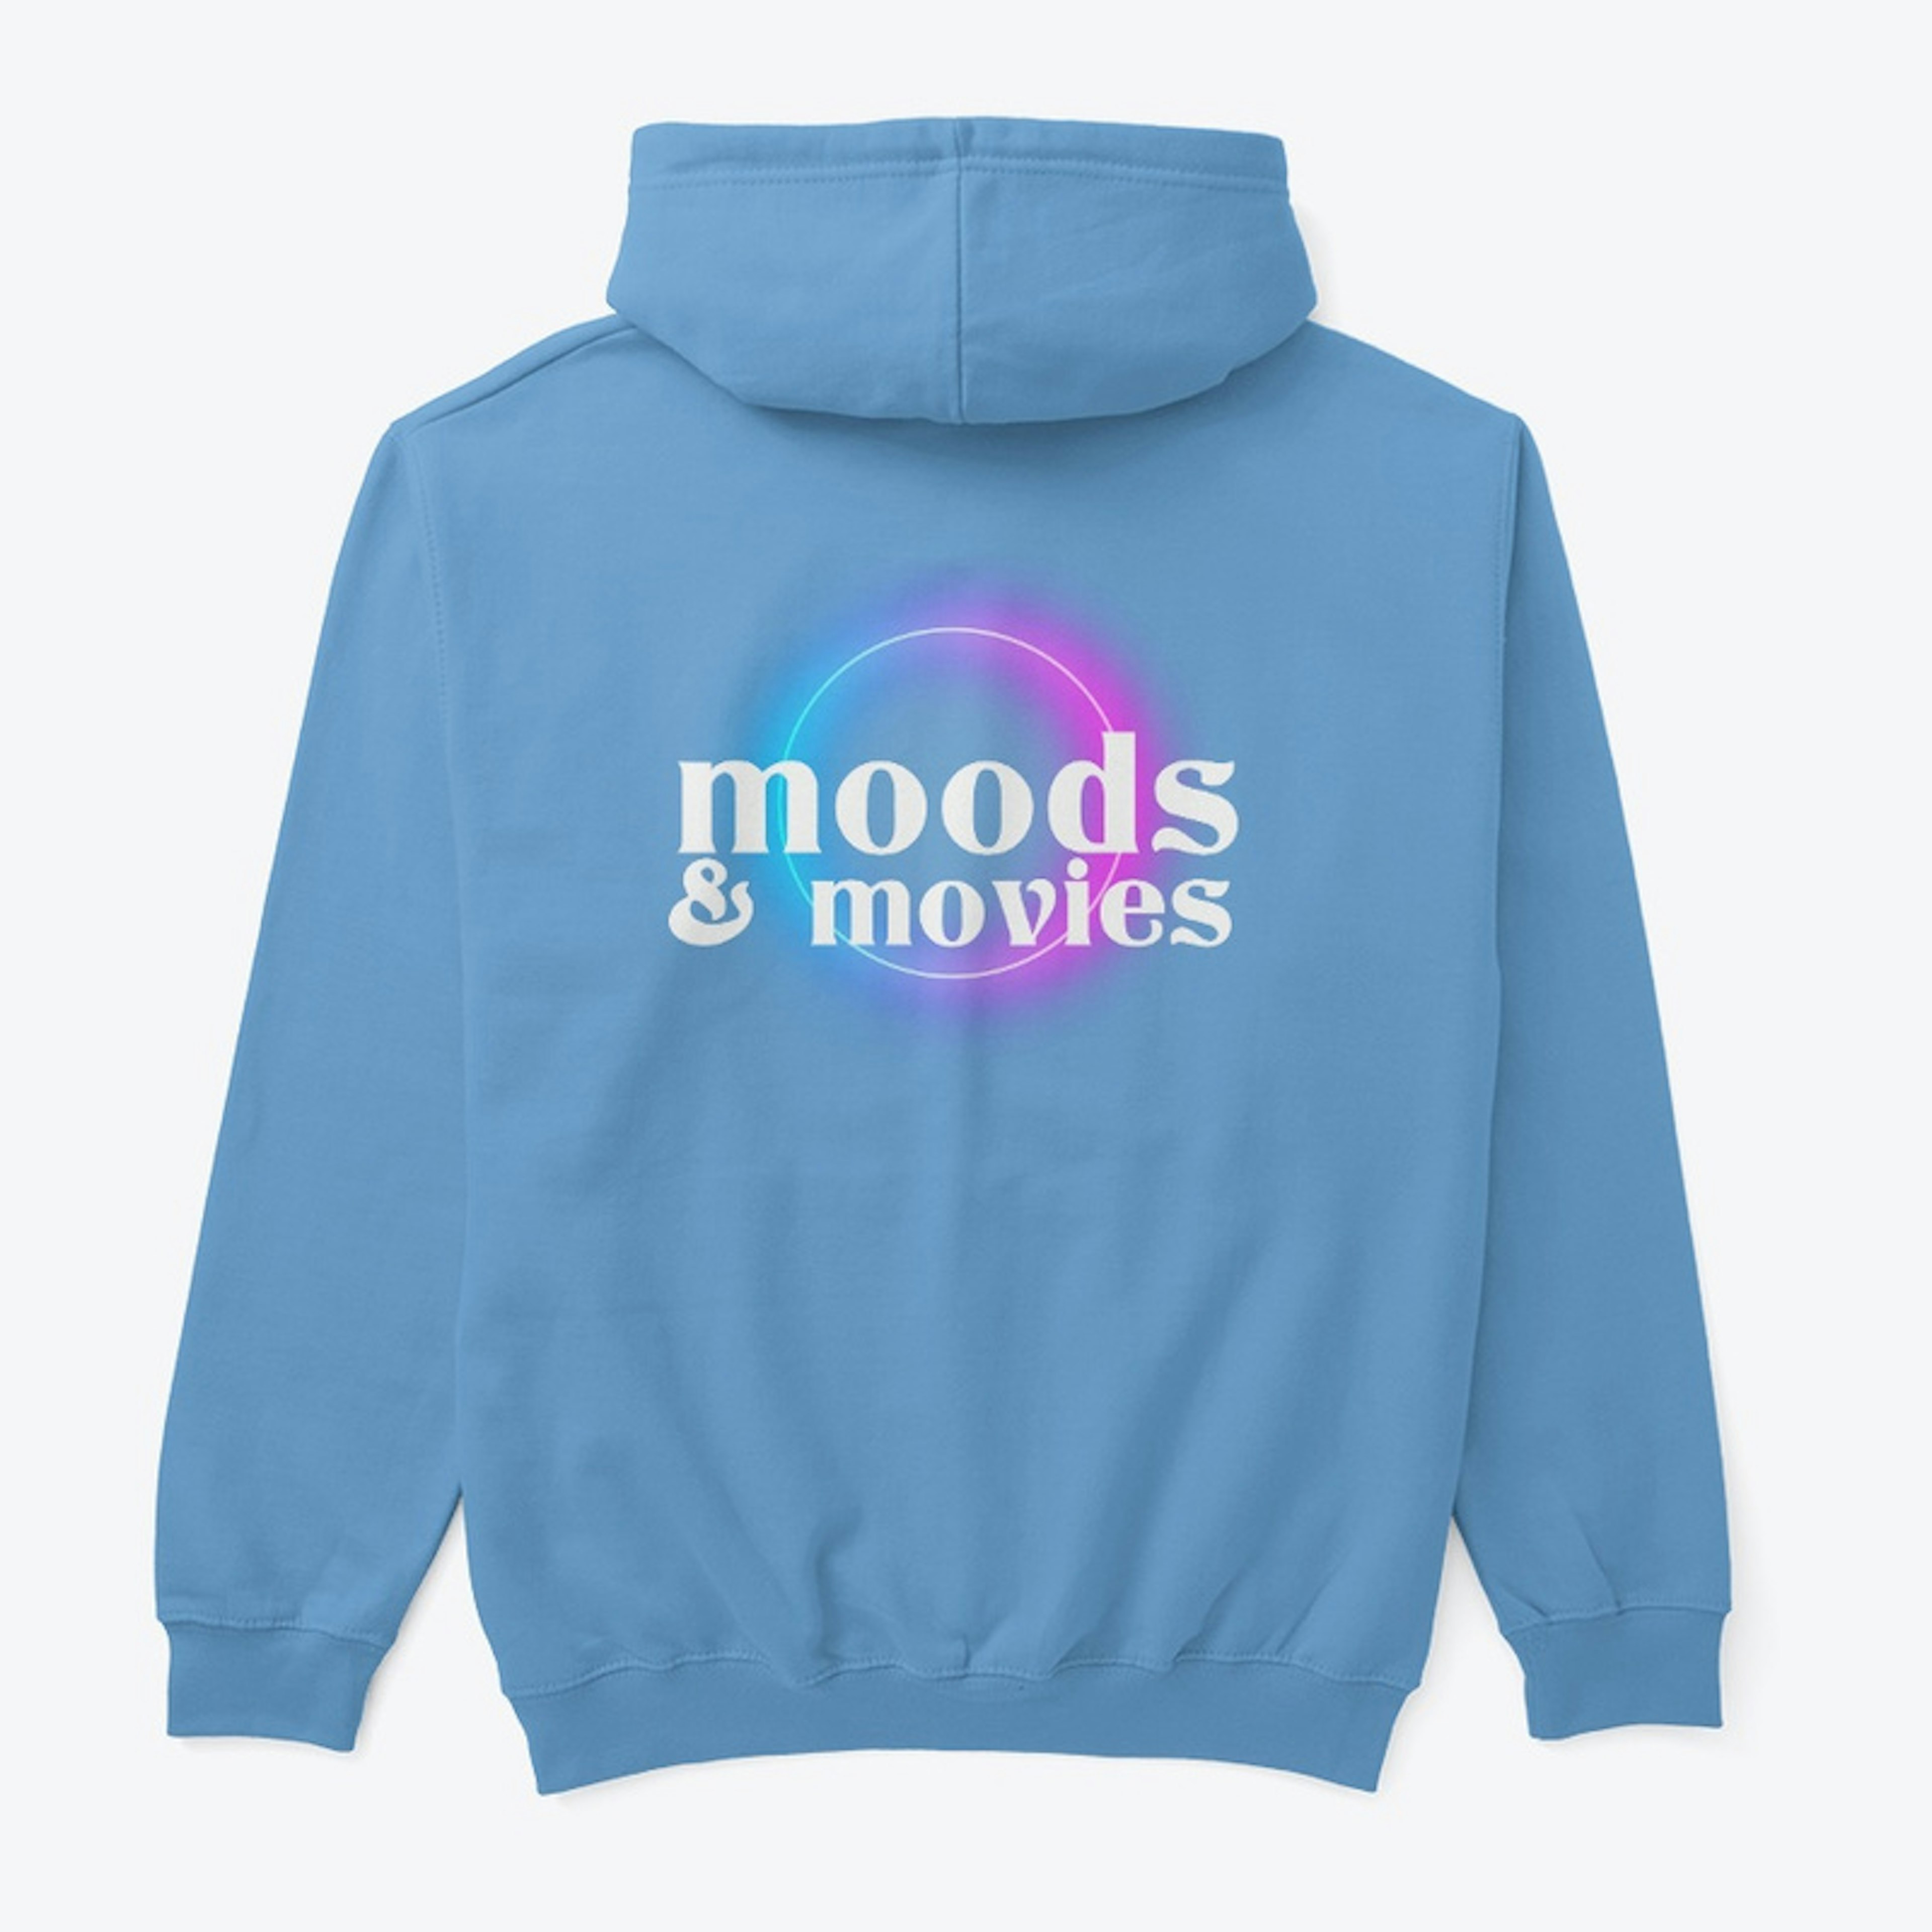 Moody - AUDFACED Apparel